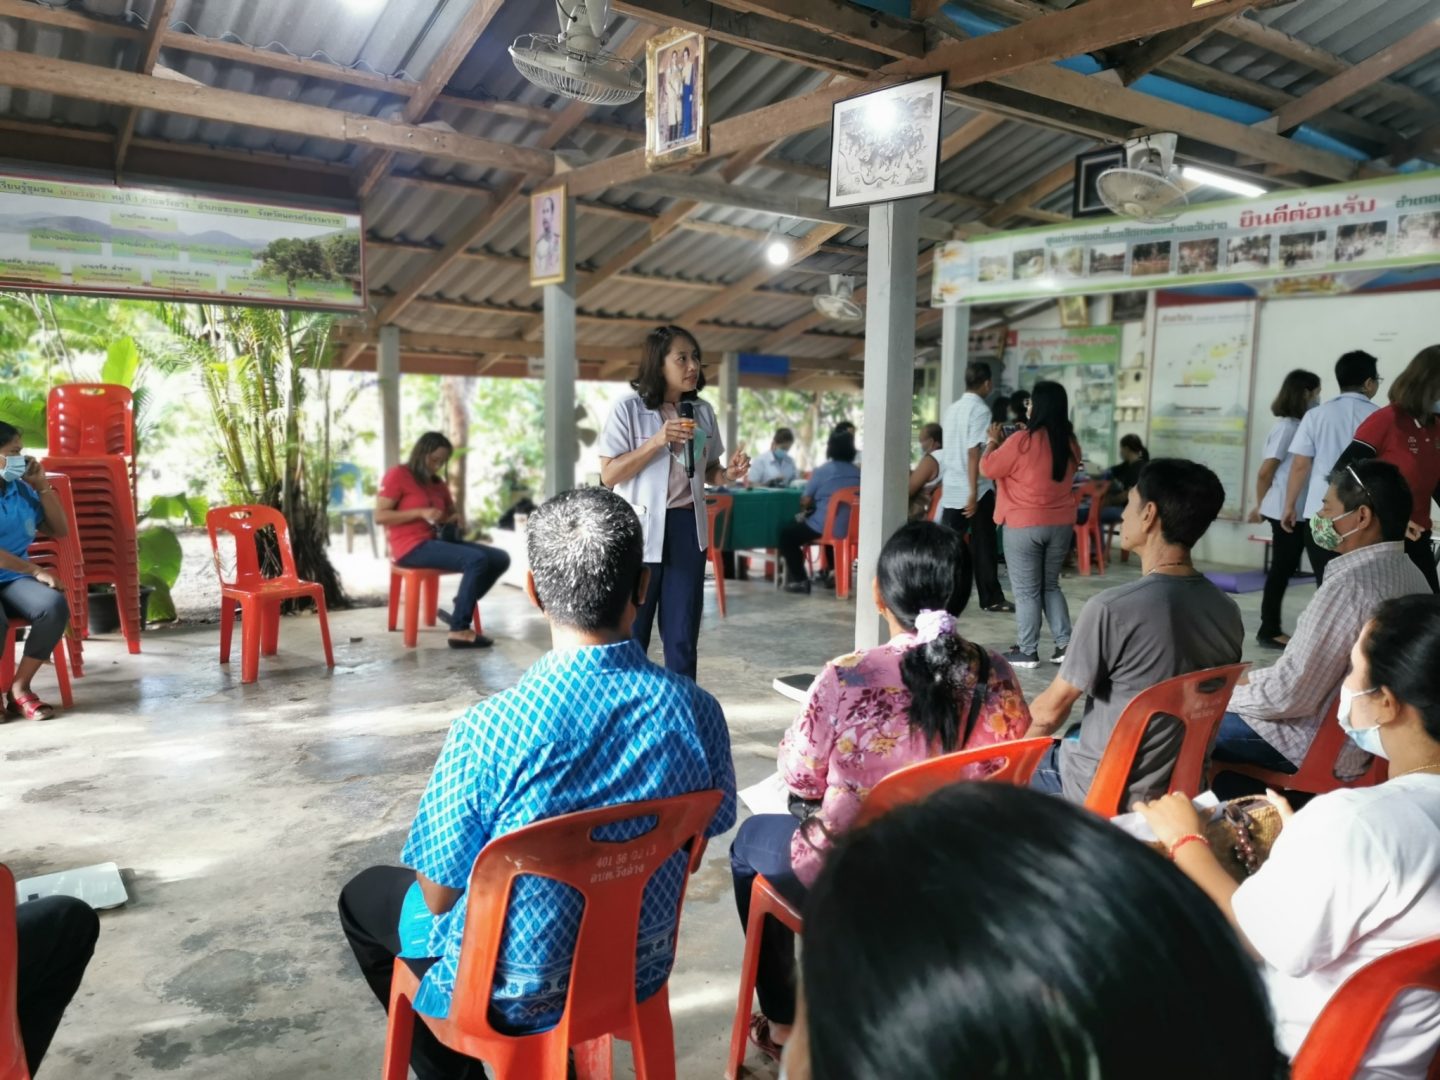 Walailak University organizes the event of “Healthy Development for Increasing the Potential of Production and Community Economy” in Klong Noy subdistrict, Pak Phanang district, Nakhon Si Thammarat.